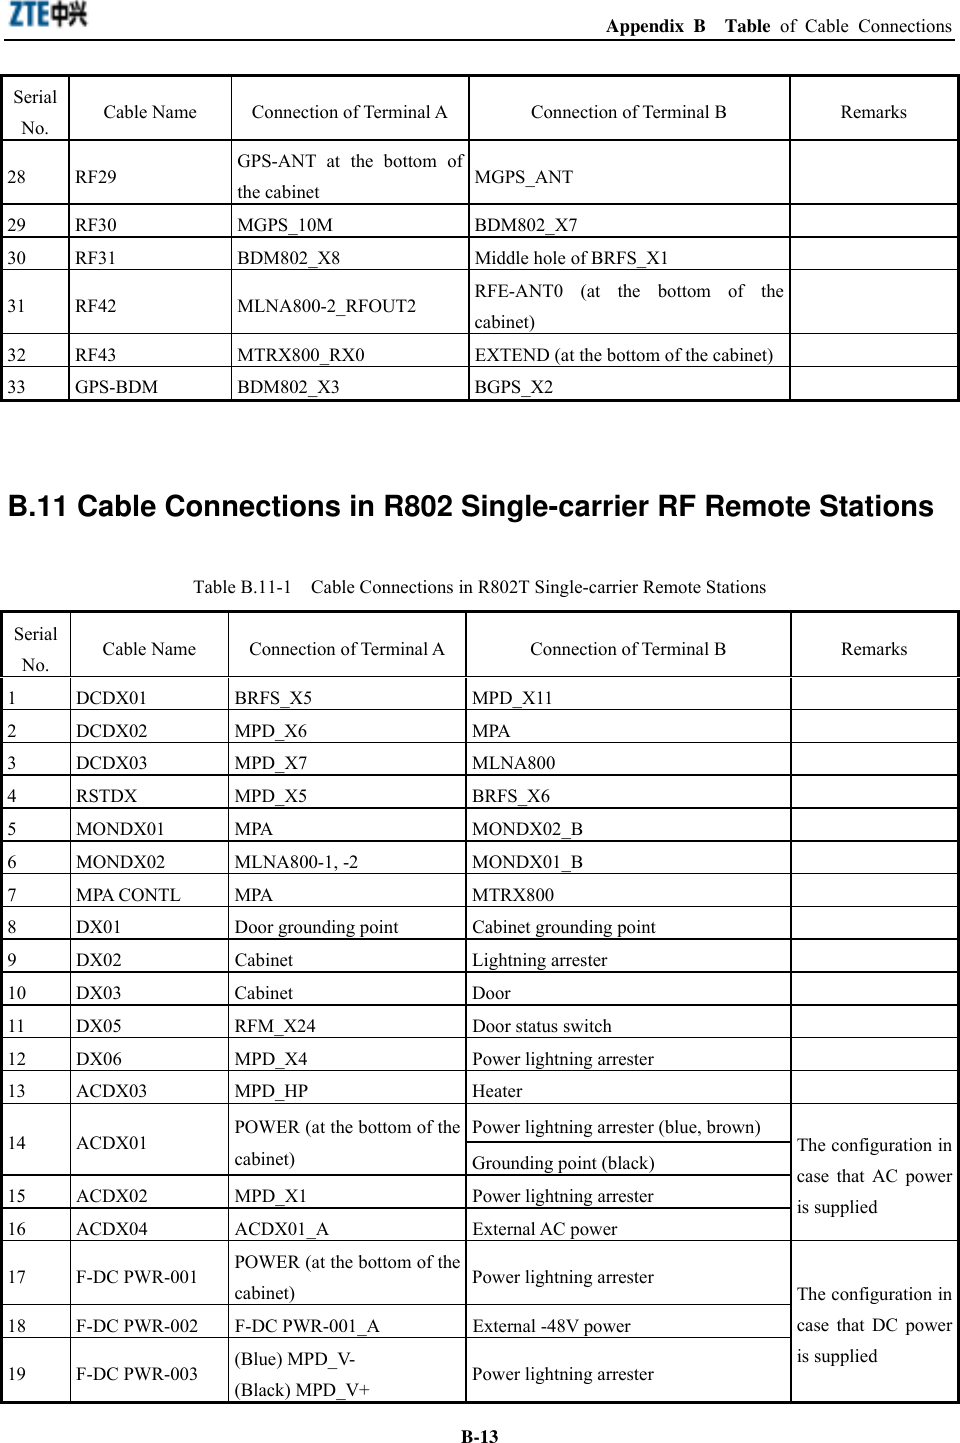  Appendix B  Table of Cable Connections  B-13Serial No.  Cable Name  Connection of Terminal A  Connection of Terminal B  Remarks 28 RF29  GPS-ANT at the bottom of the cabinet  MGPS_ANT  29 RF30  MGPS_10M  BDM802_X7   30  RF31  BDM802_X8  Middle hole of BRFS_X1   31 RF42  MLNA800-2_RFOUT2  RFE-ANT0 (at the bottom of the cabinet)   32  RF43  MTRX800_RX0  EXTEND (at the bottom of the cabinet)   33 GPS-BDM  BDM802_X3  BGPS_X2    B.11 Cable Connections in R802 Single-carrier RF Remote Stations Table B.11-1    Cable Connections in R802T Single-carrier Remote Stations Serial No.  Cable Name  Connection of Terminal A  Connection of Terminal B  Remarks 1 DCDX01  BRFS_X5  MPD_X11   2 DCDX02  MPD_X6  MPA   3 DCDX03  MPD_X7  MLNA800   4 RSTDX  MPD_X5  BRFS_X6   5 MONDX01  MPA  MONDX02_B   6 MONDX02  MLNA800-1, -2  MONDX01_B   7 MPA CONTL MPA  MTRX800   8  DX01  Door grounding point  Cabinet grounding point   9 DX02  Cabinet  Lightning arrester    10 DX03  Cabinet  Door   11  DX05  RFM_X24  Door status switch   12  DX06  MPD_X4  Power lightning arrester   13 ACDX03  MPD_HP  Heater   Power lightning arrester (blue, brown) 14 ACDX01  POWER (at the bottom of the cabinet)  Grounding point (black) 15  ACDX02  MPD_X1  Power lightning arrester 16 ACDX04  ACDX01_A  External AC power The configuration in case that AC power is supplied 17 F-DC PWR-001 POWER (at the bottom of the cabinet)  Power lightning arrester 18  F-DC PWR-002  F-DC PWR-001_A  External -48V power 19 F-DC PWR-003 (Blue) MPD_V- (Black) MPD_V+  Power lightning arrester The configuration in case that DC power is supplied 